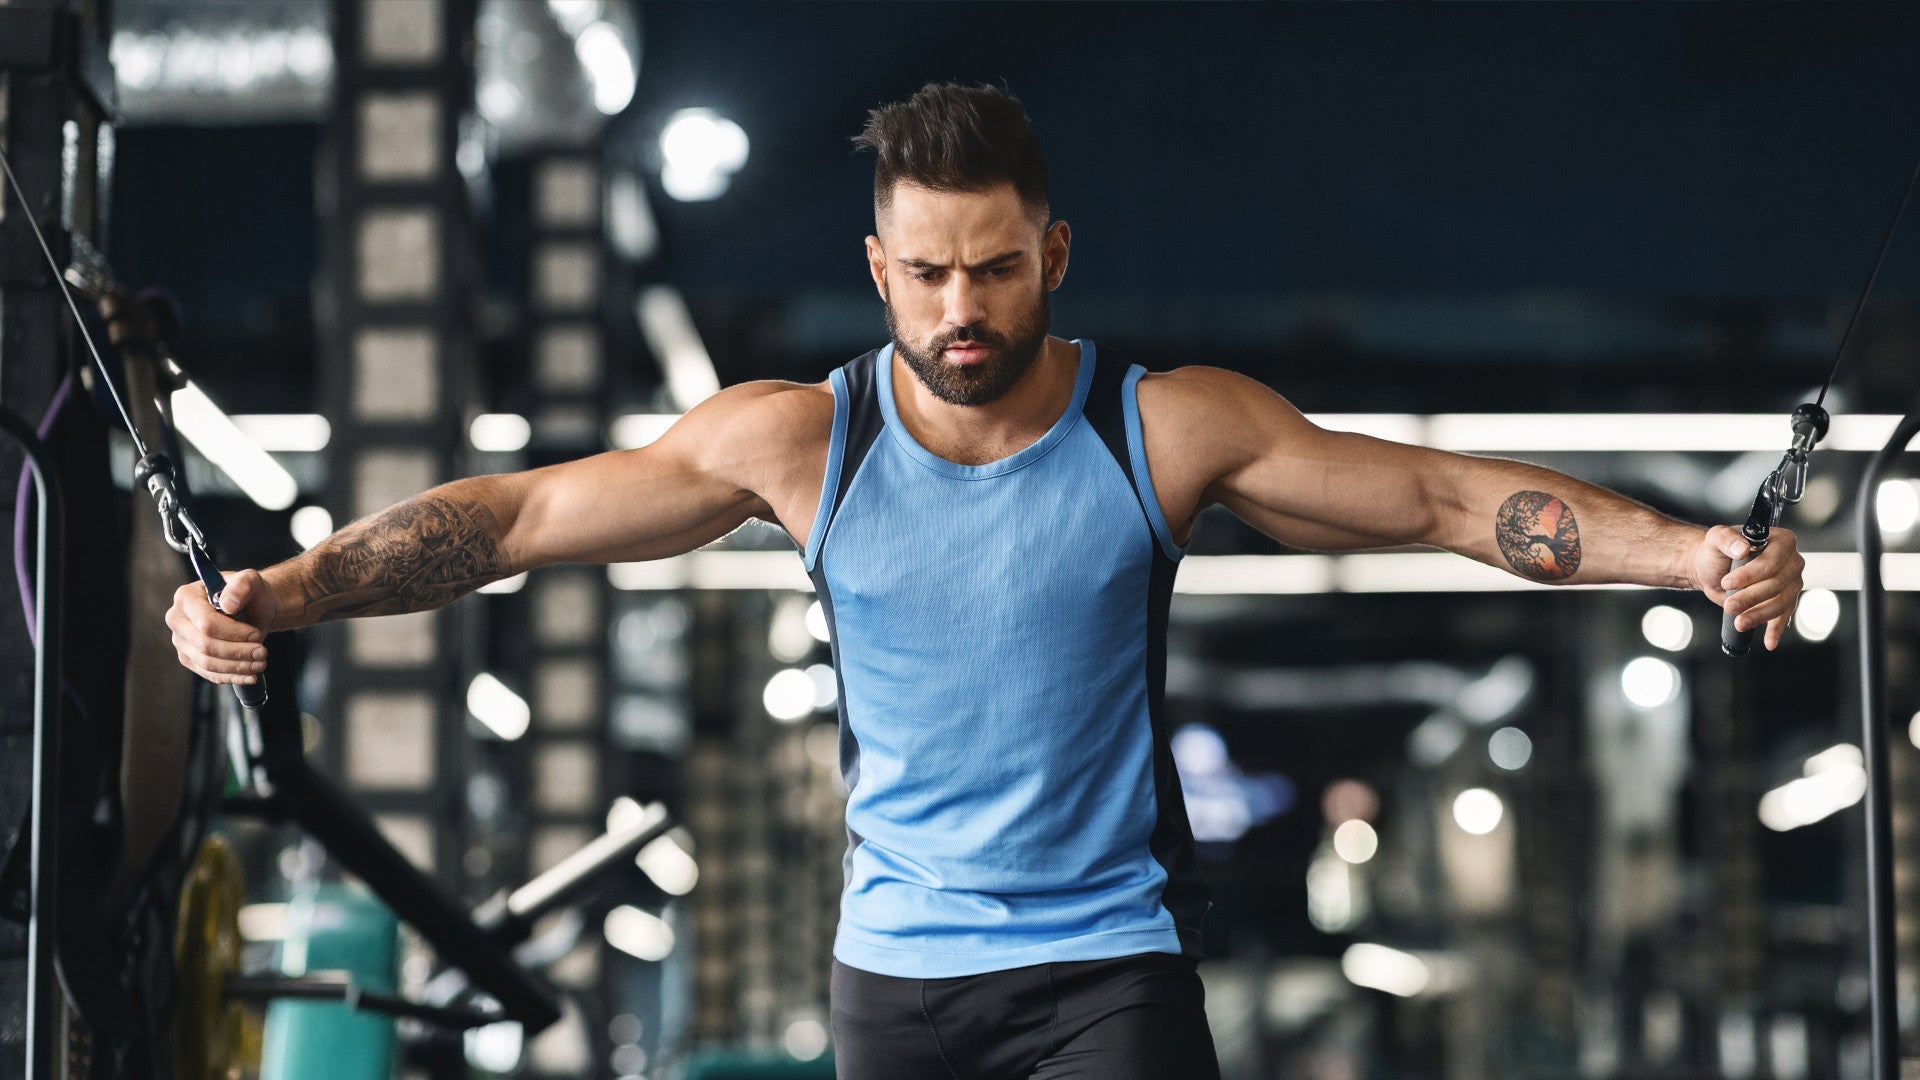 man gains muscle mass with high metabolism